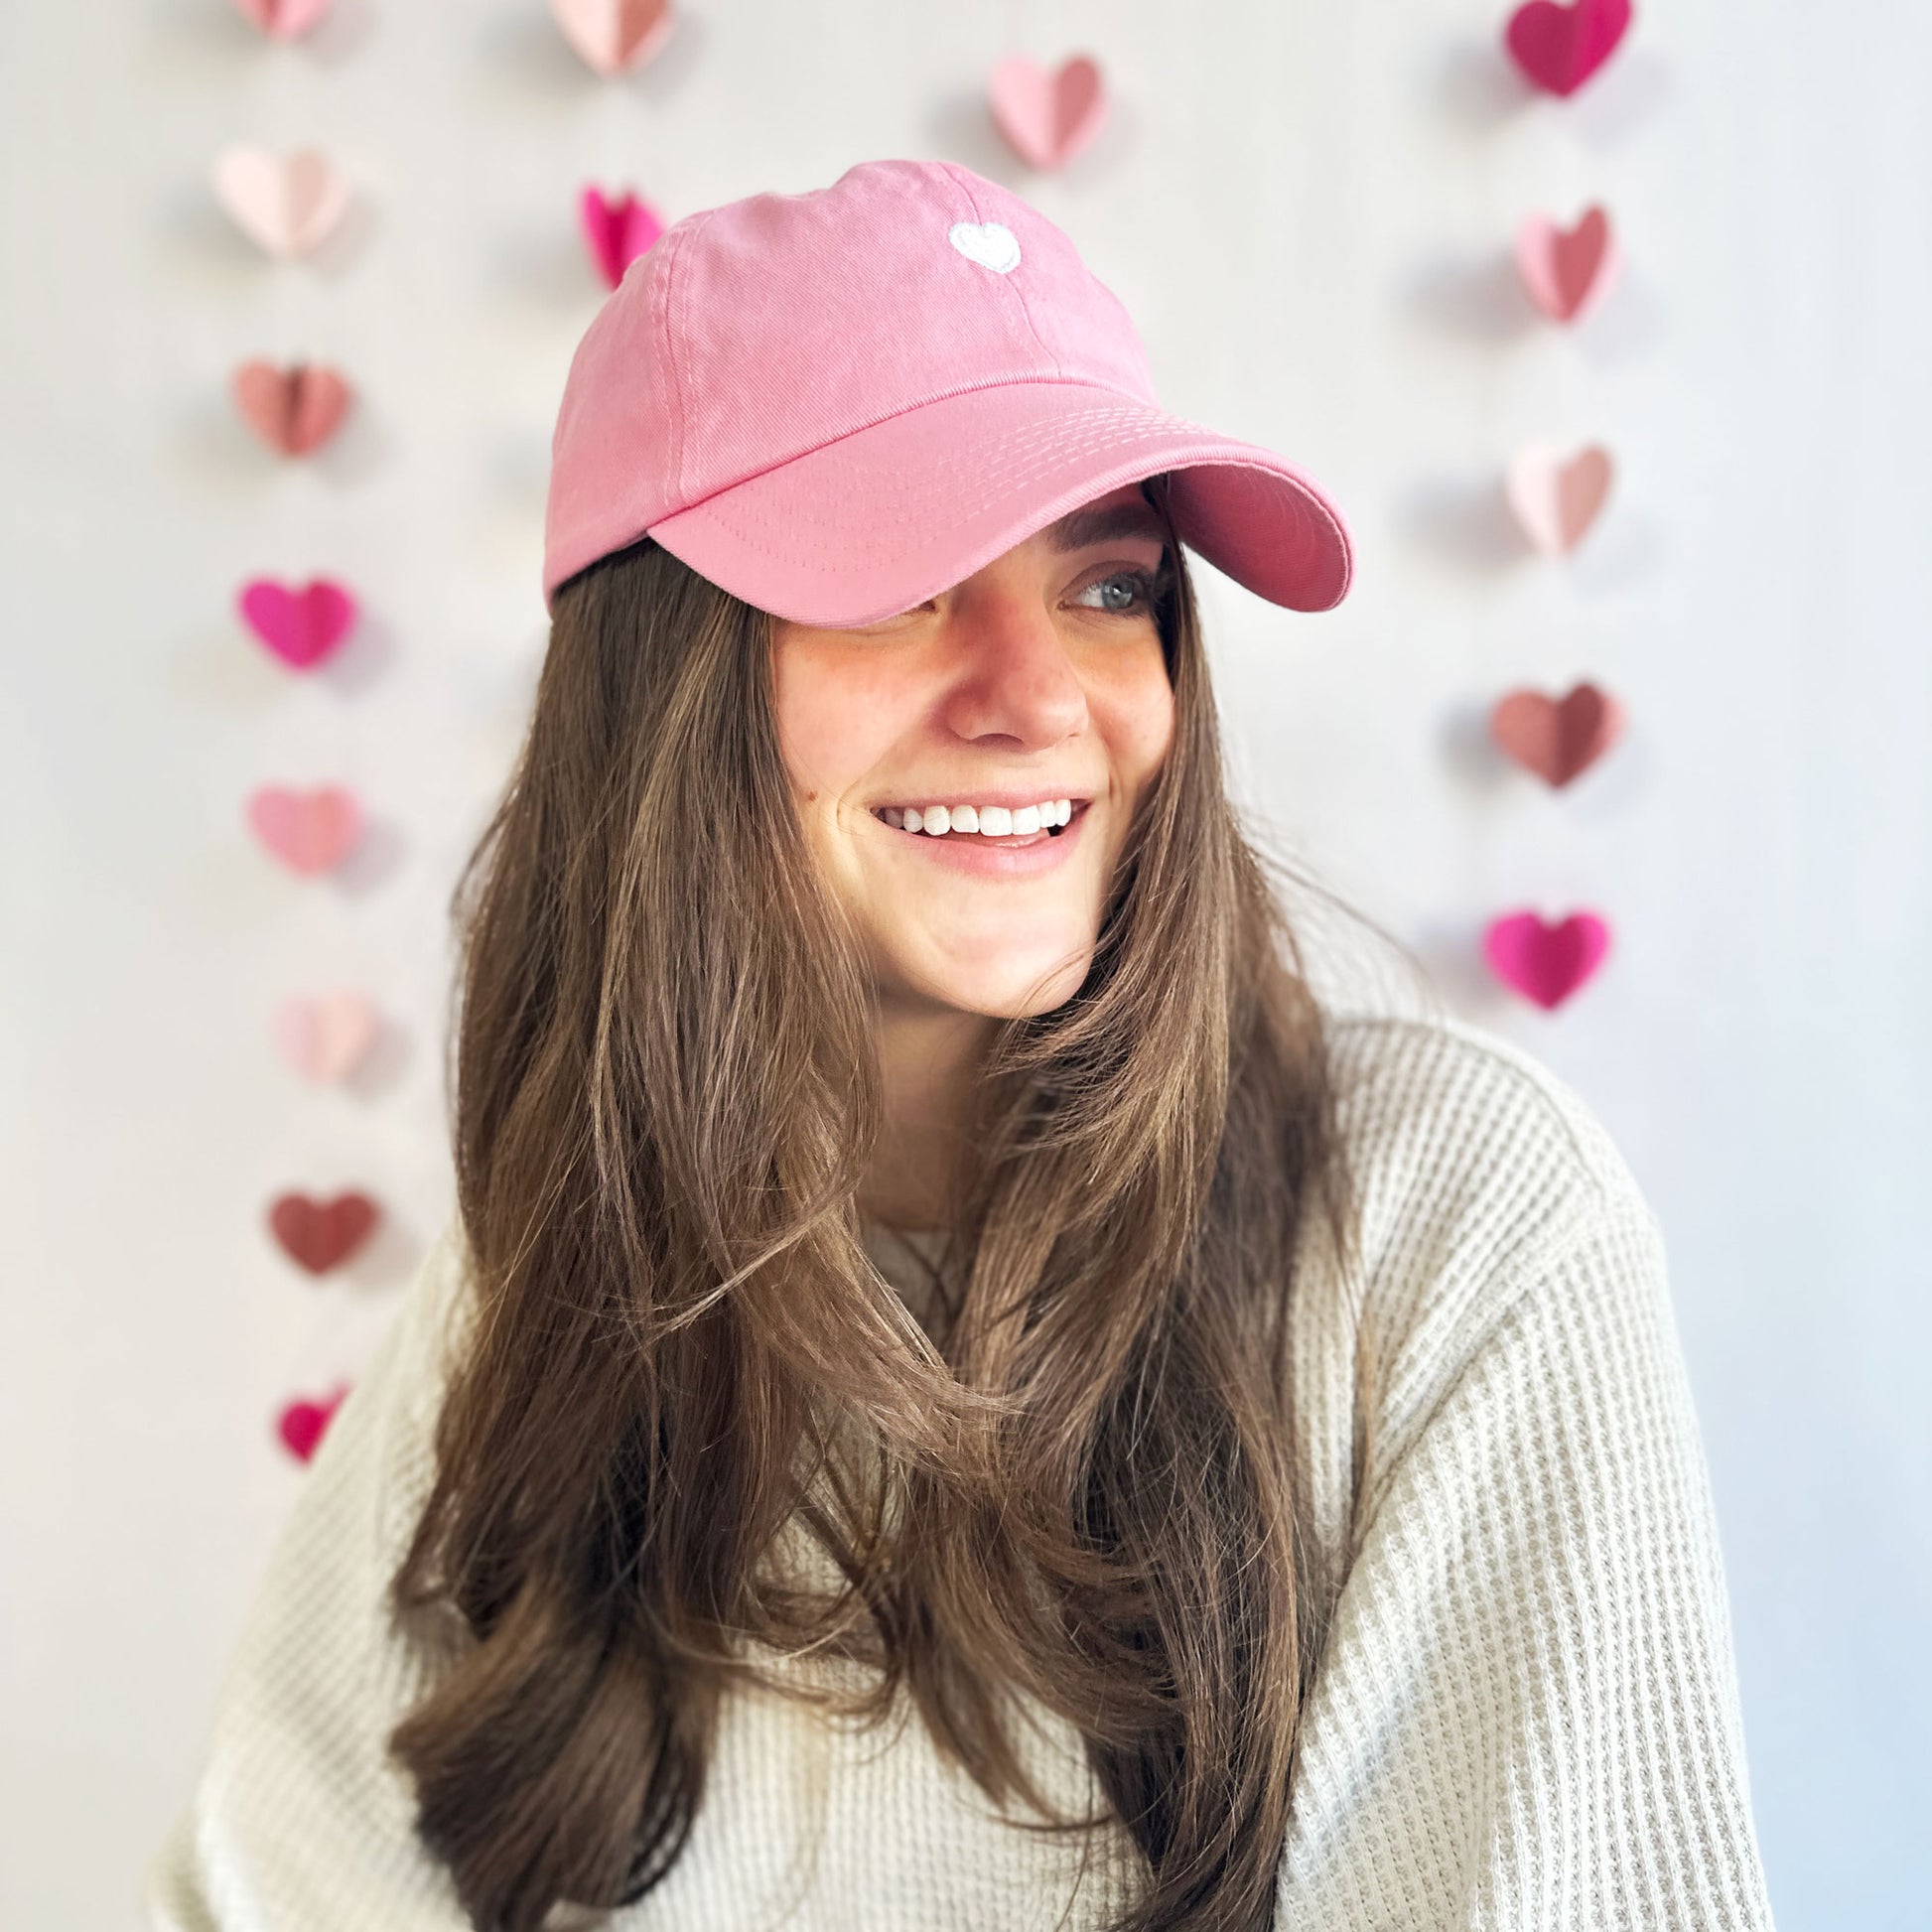 young woman wearing a pink baseball cap with mini white embroidered heart